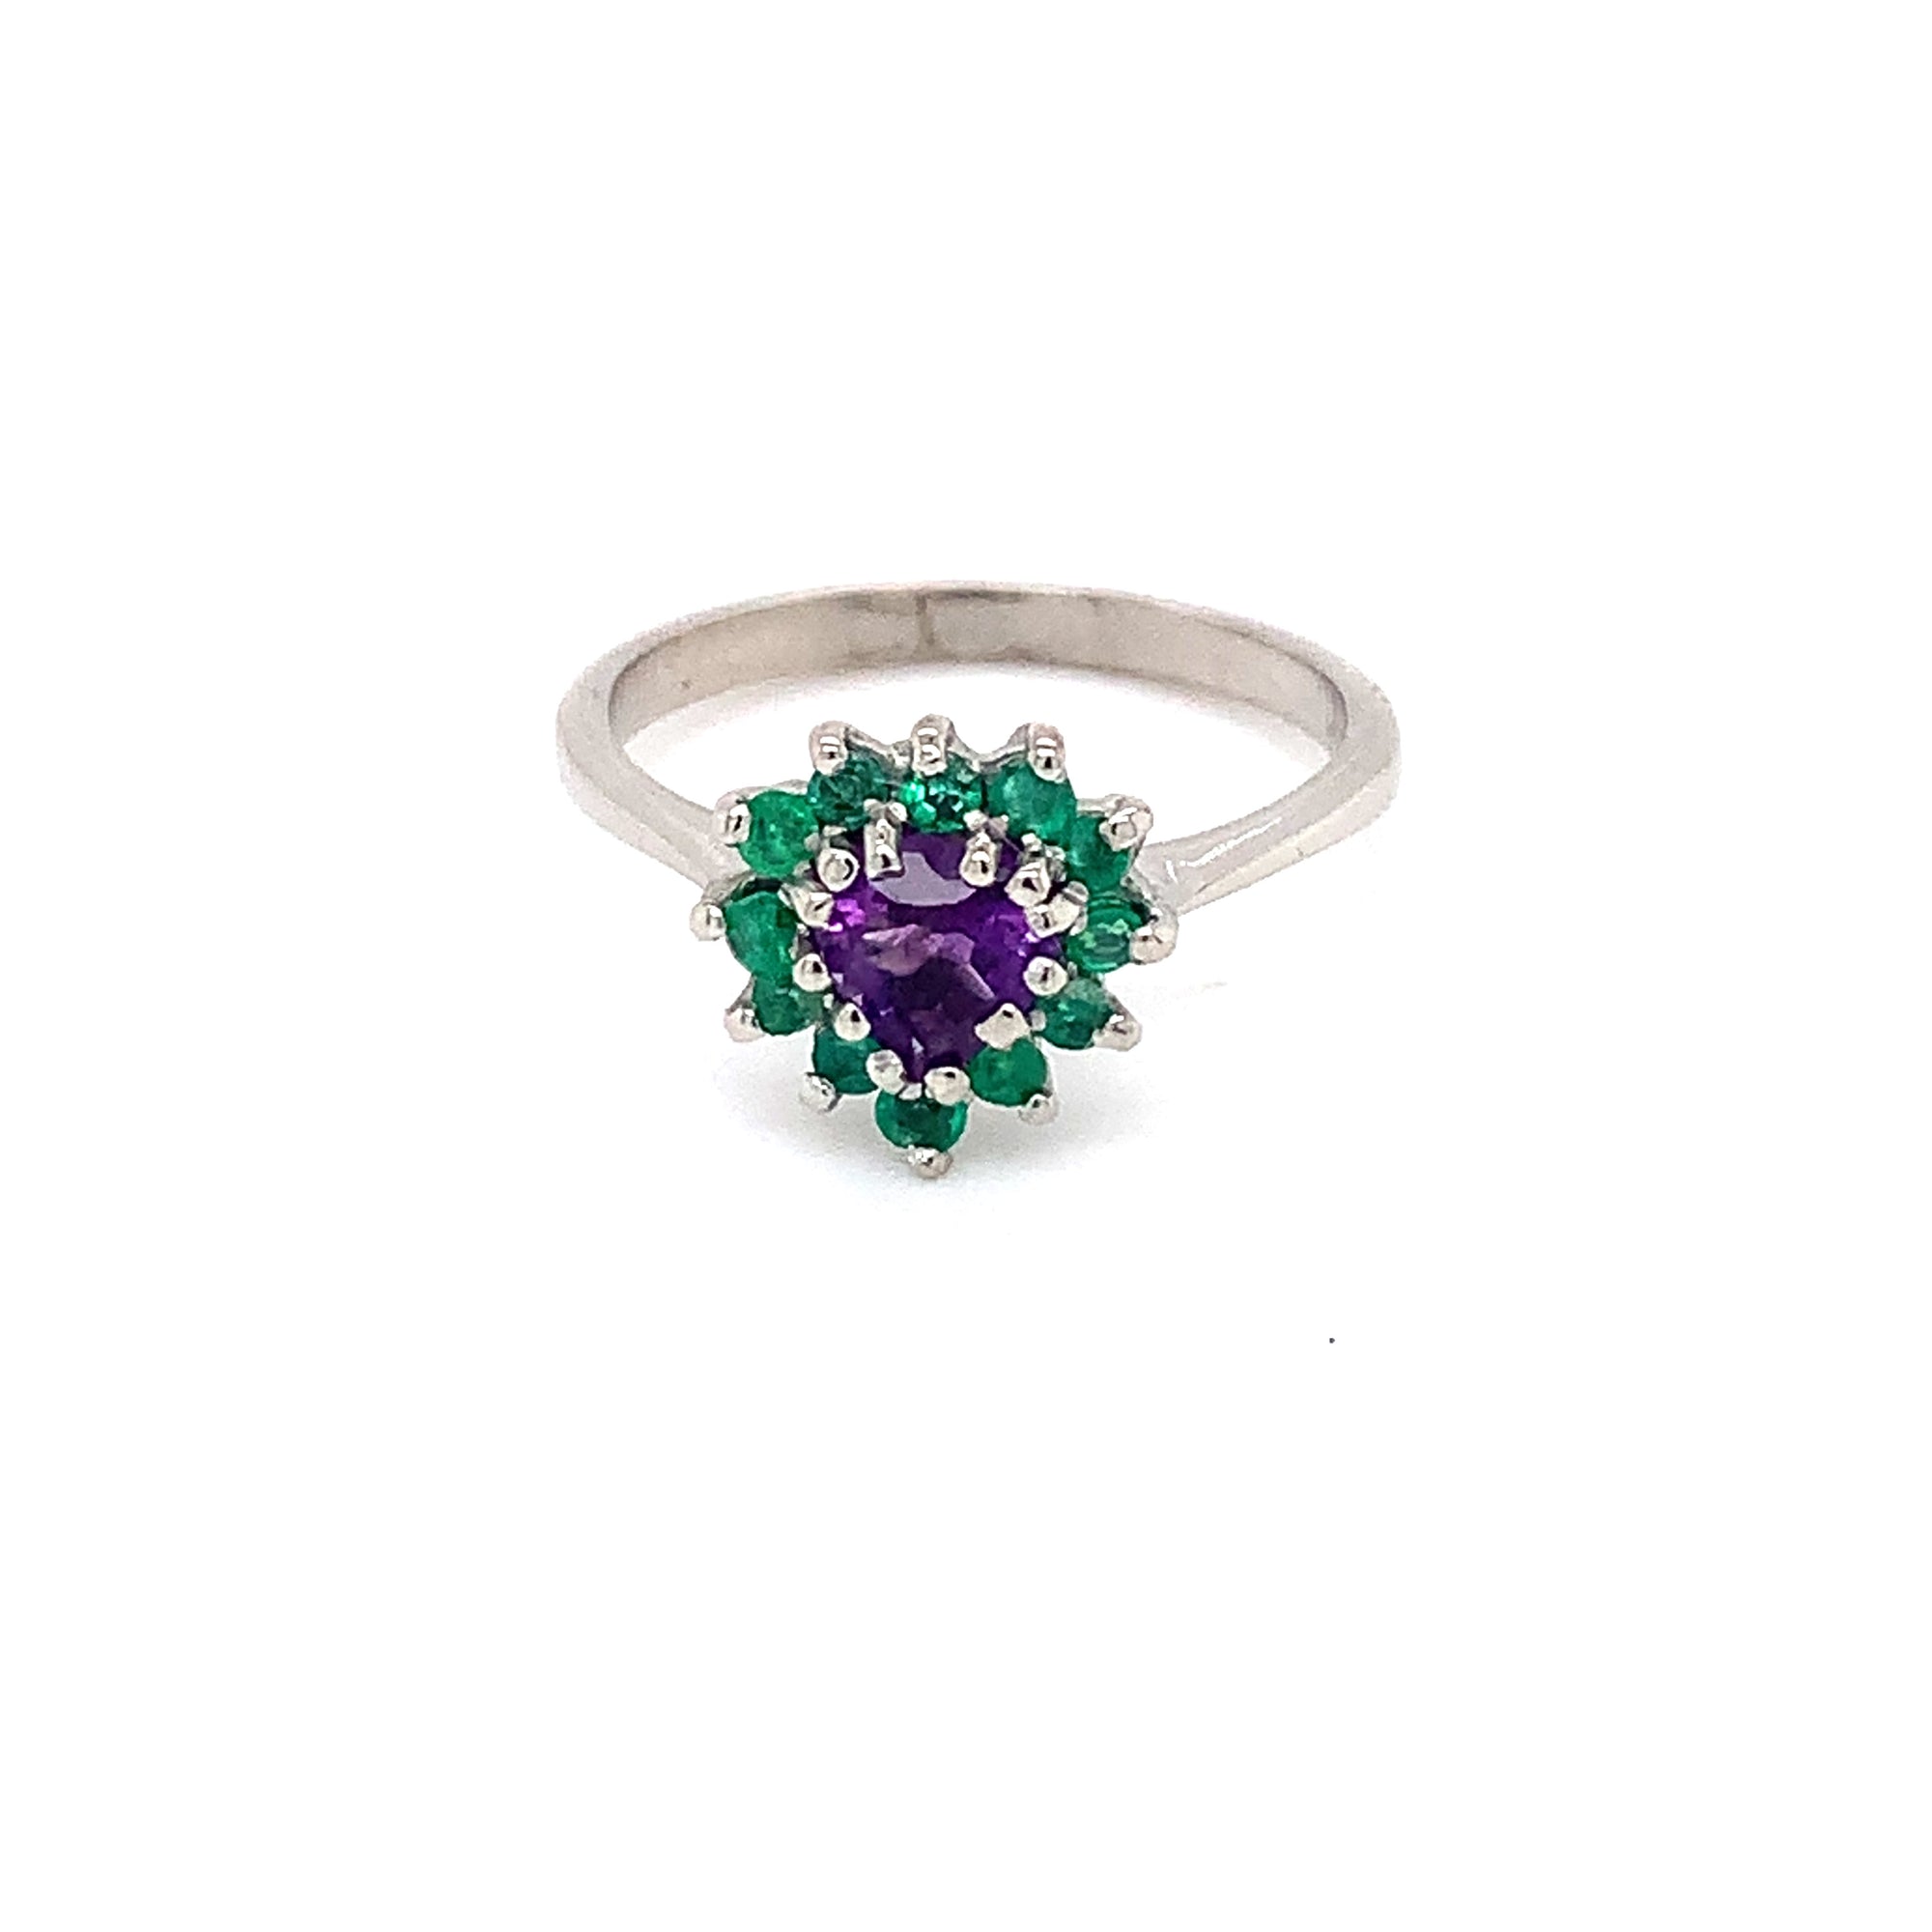 Heart Shaped Amethyst and Emerald Vintage Dress Ring in 18ct White Gold